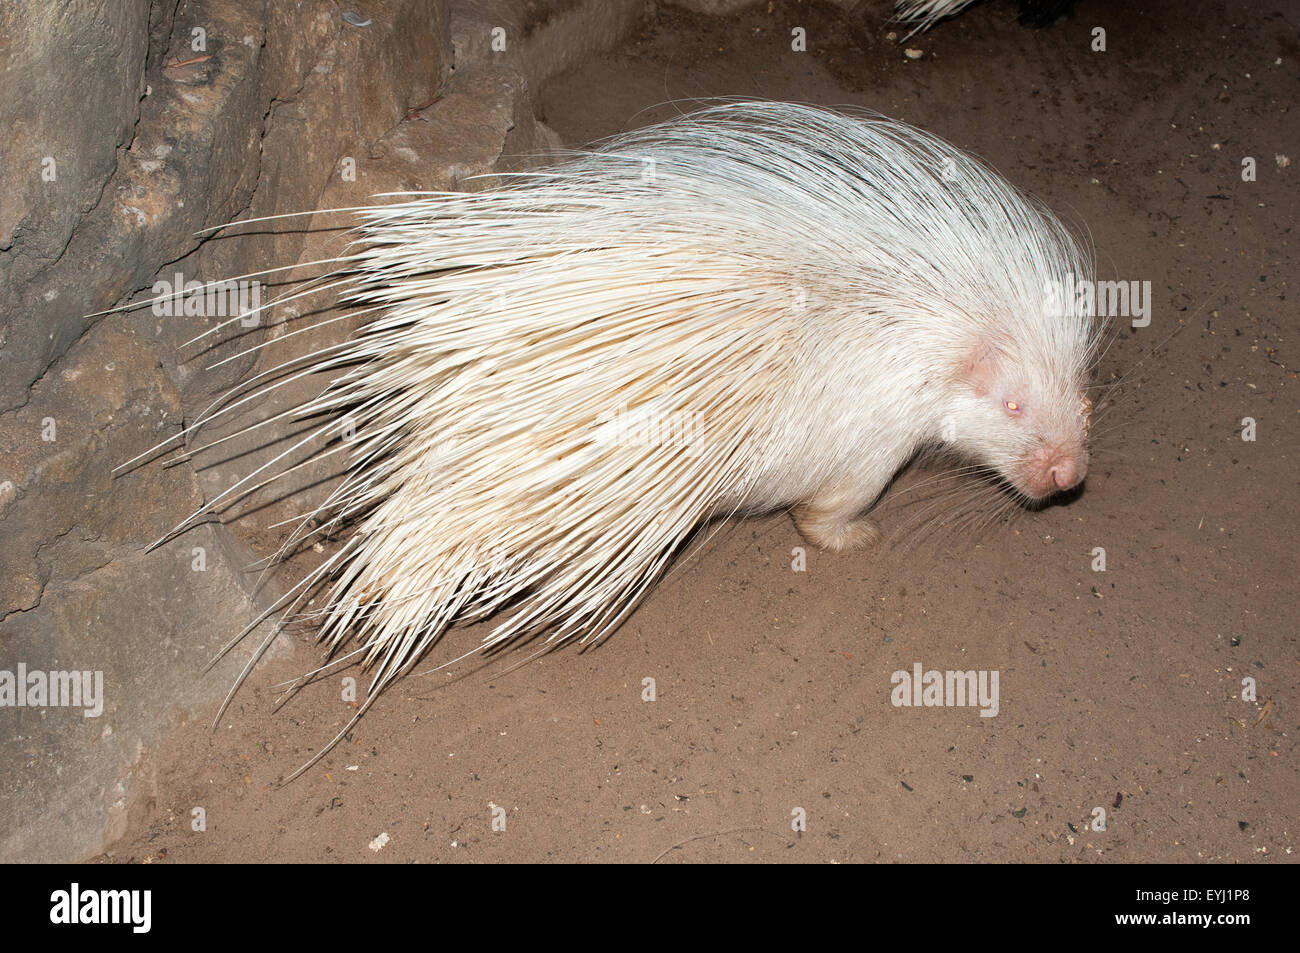 Albino Cape porcupine. Albinism in animals is considered to be a hereditary condition characterised by the absence of pigment in Stock Photo